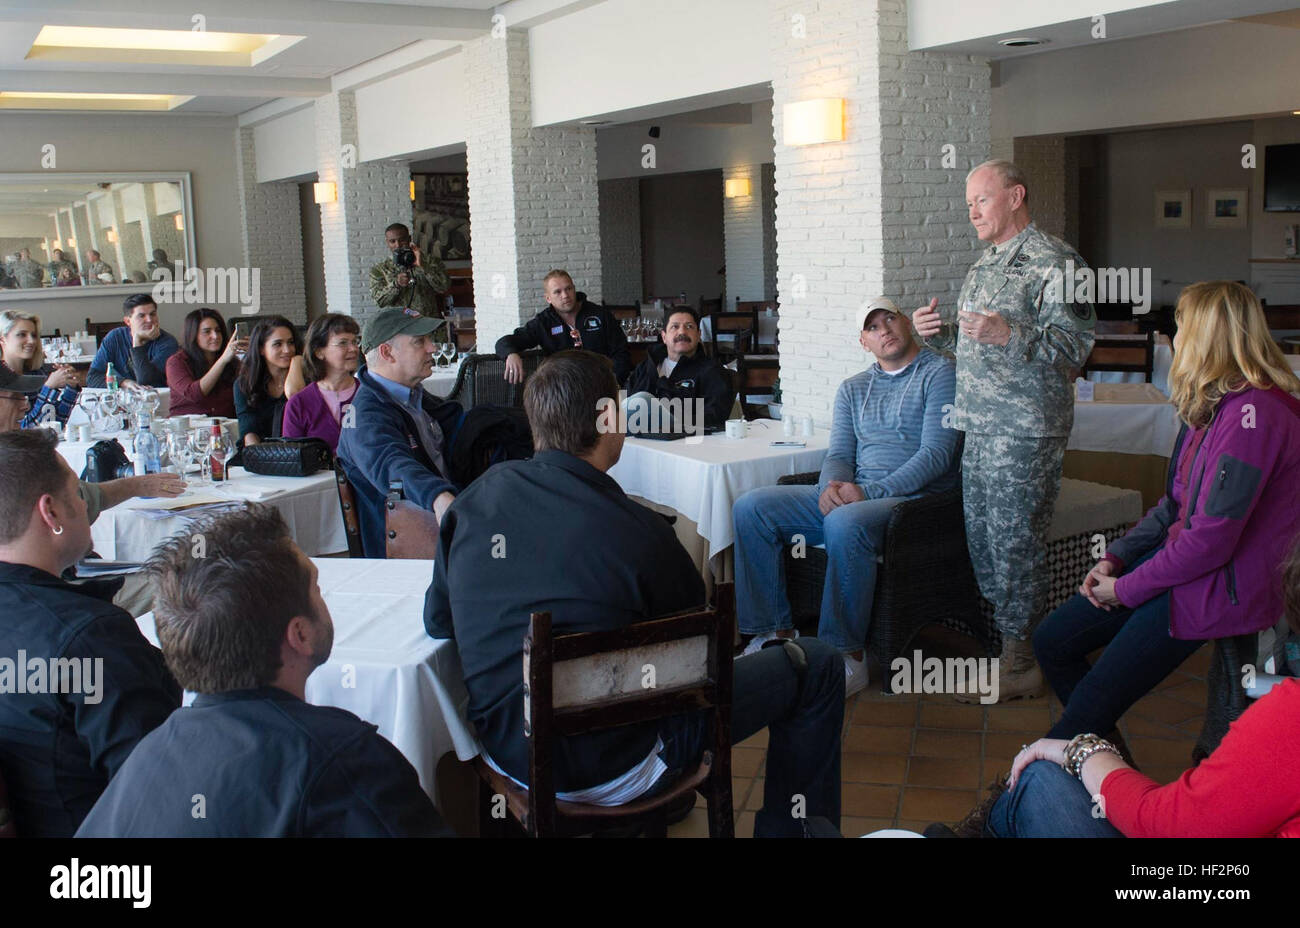 Chairman of the Joint Chiefs of Staff Gen. Martin E. Dempsey talks with USO talent and staff before they all begin their first troop visit and perform their first show of the 2014 Chairman USO Holiday tour in Rota, Spain, Dec. 6, 2014. Country music artist Kellie Pickler, retired Chicago Bear middle linebacker Brian Urlacher, actress Dianna Agron, Deanie Dempsey, Gen. Martin Dempsey, comedian Rob Riggle, actress Meghan Markle, Washington Nationals pitcher Doug Fister and USO President Dr. J.D. Couch are accompanying the Chairman to five different countries where U.S. service members are deploy Stock Photo